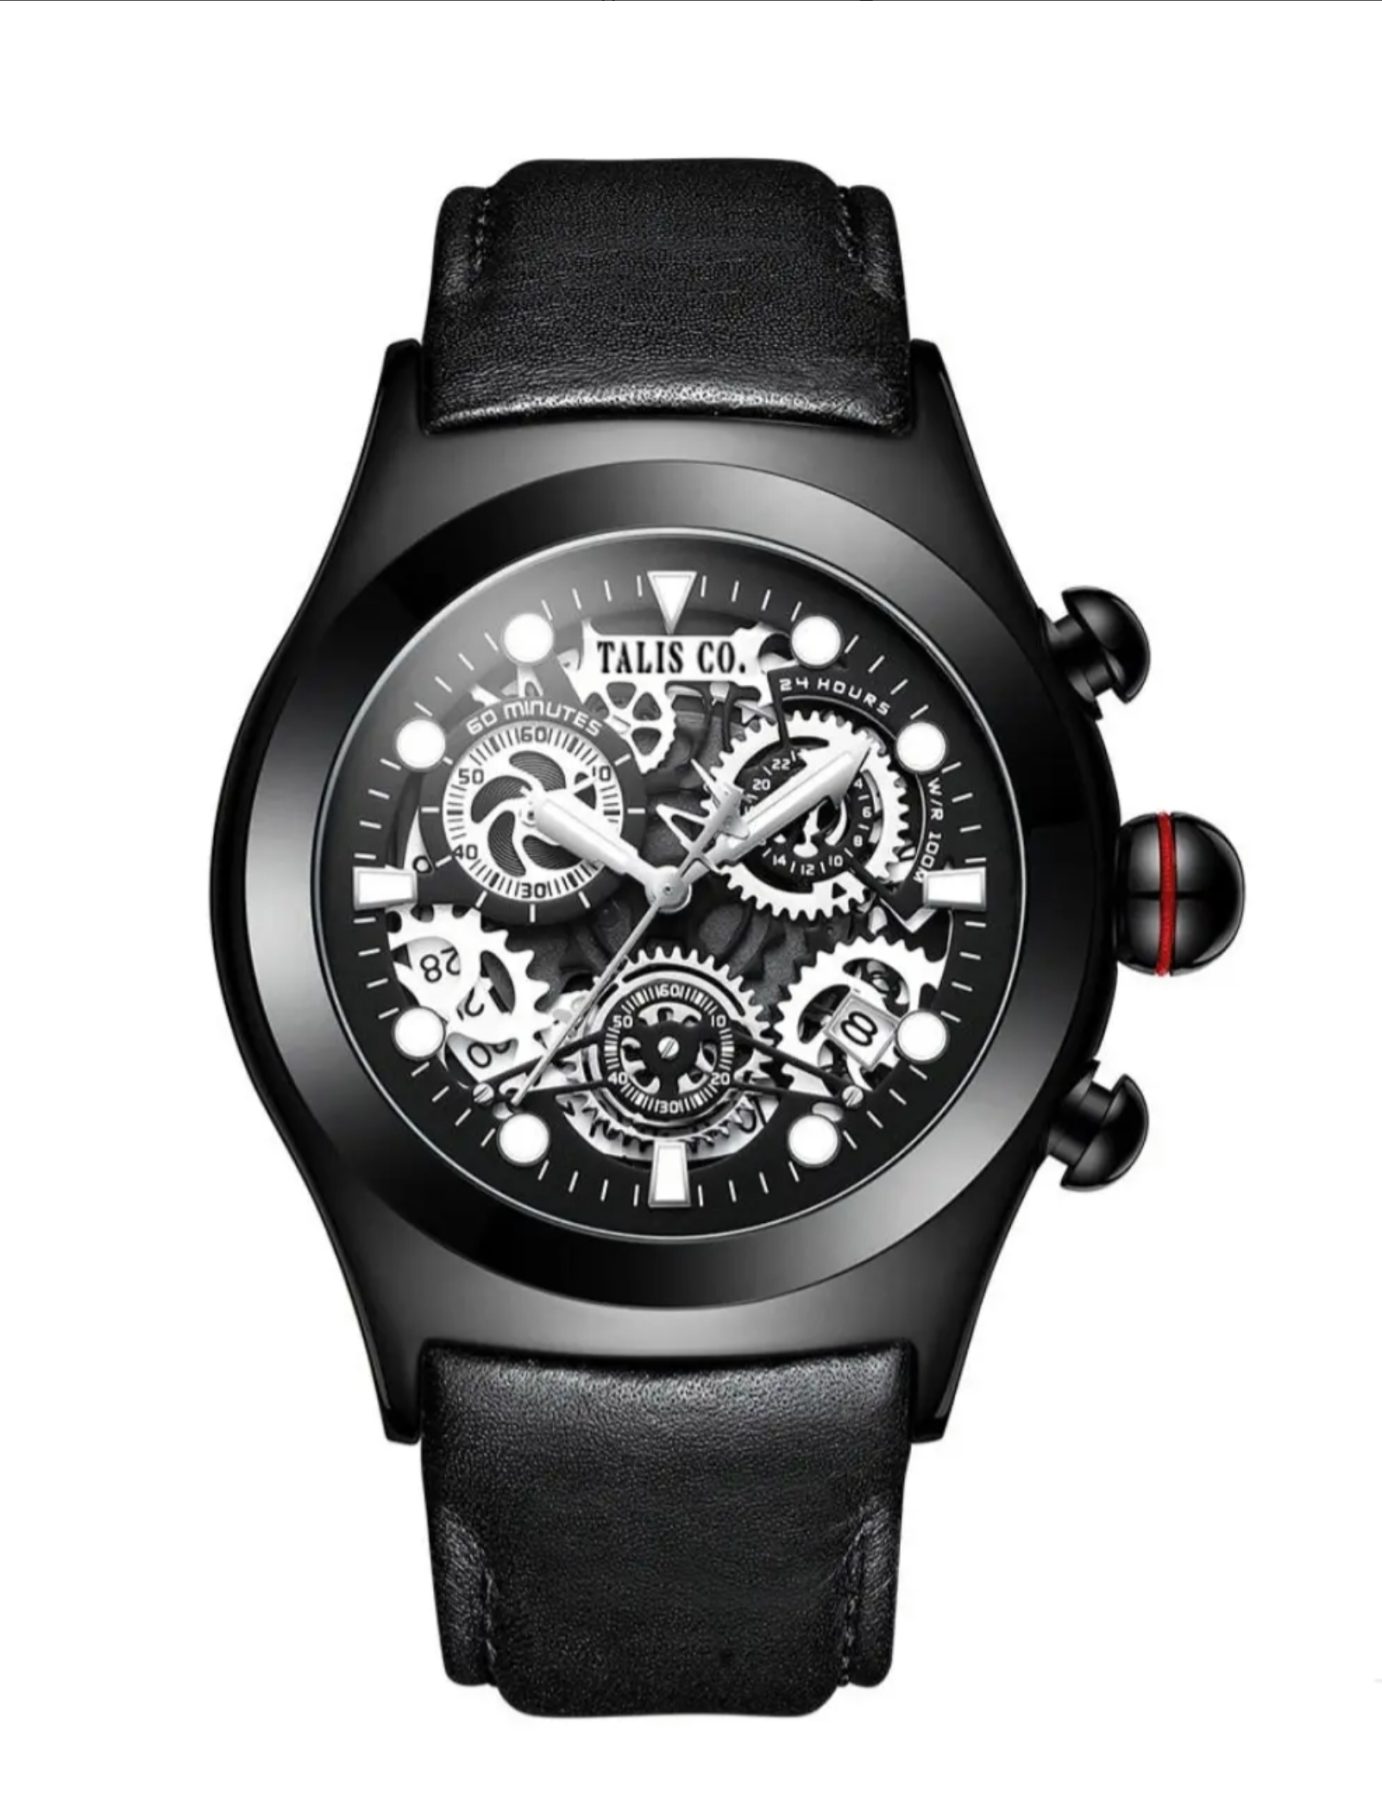 Talis Co Zeus Chronograph Watch - Black Edition (RRP£699). Sorry We're Out Of Stock! We're trying to get more in! Please check back soon!